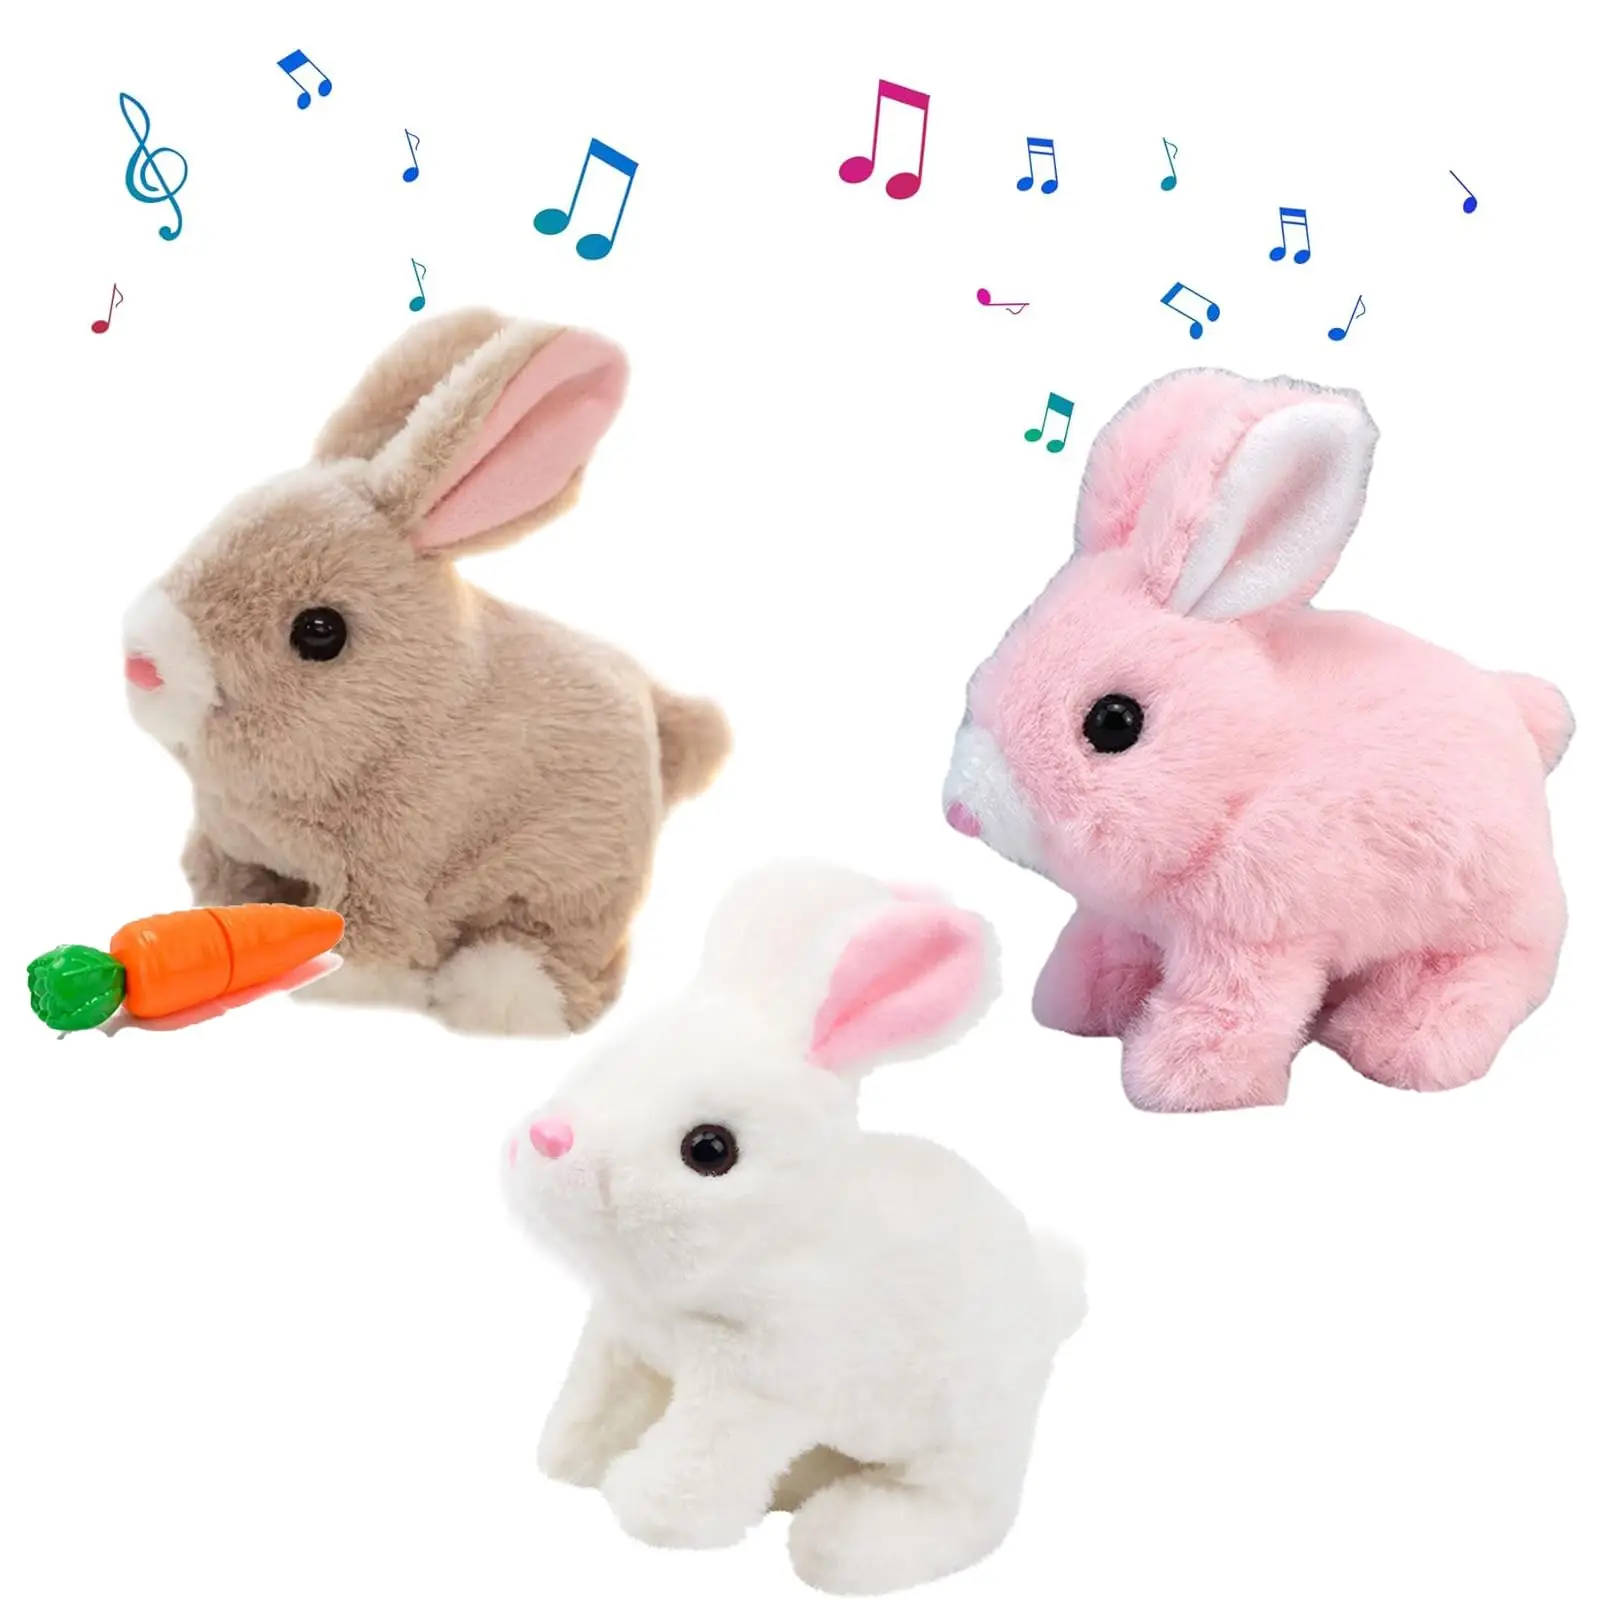 Bunny Toys Educational Interactive Toys Easter Filling Bunny Toy Walking Rabbit Educational Toys for Kids Birthday Gift electronic bunny toy plush rabbit toy with sounds and movements walking wiggle ears twitch nose easter birthday gift for boys